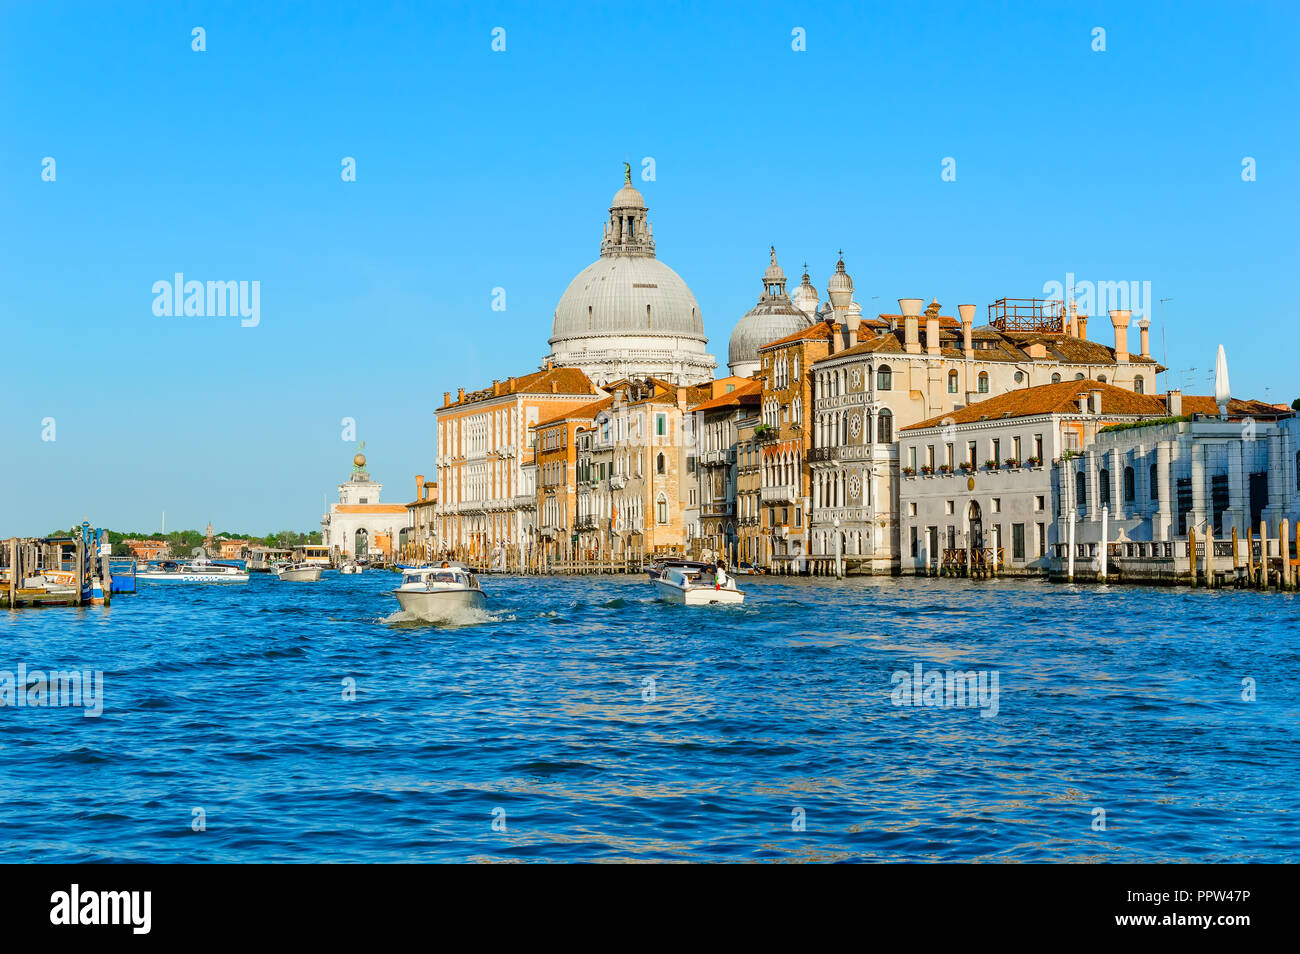 Venice, Italy: famous Basilica Santa Maria della Salute and palaces, view from Grand Canal Stock Photo